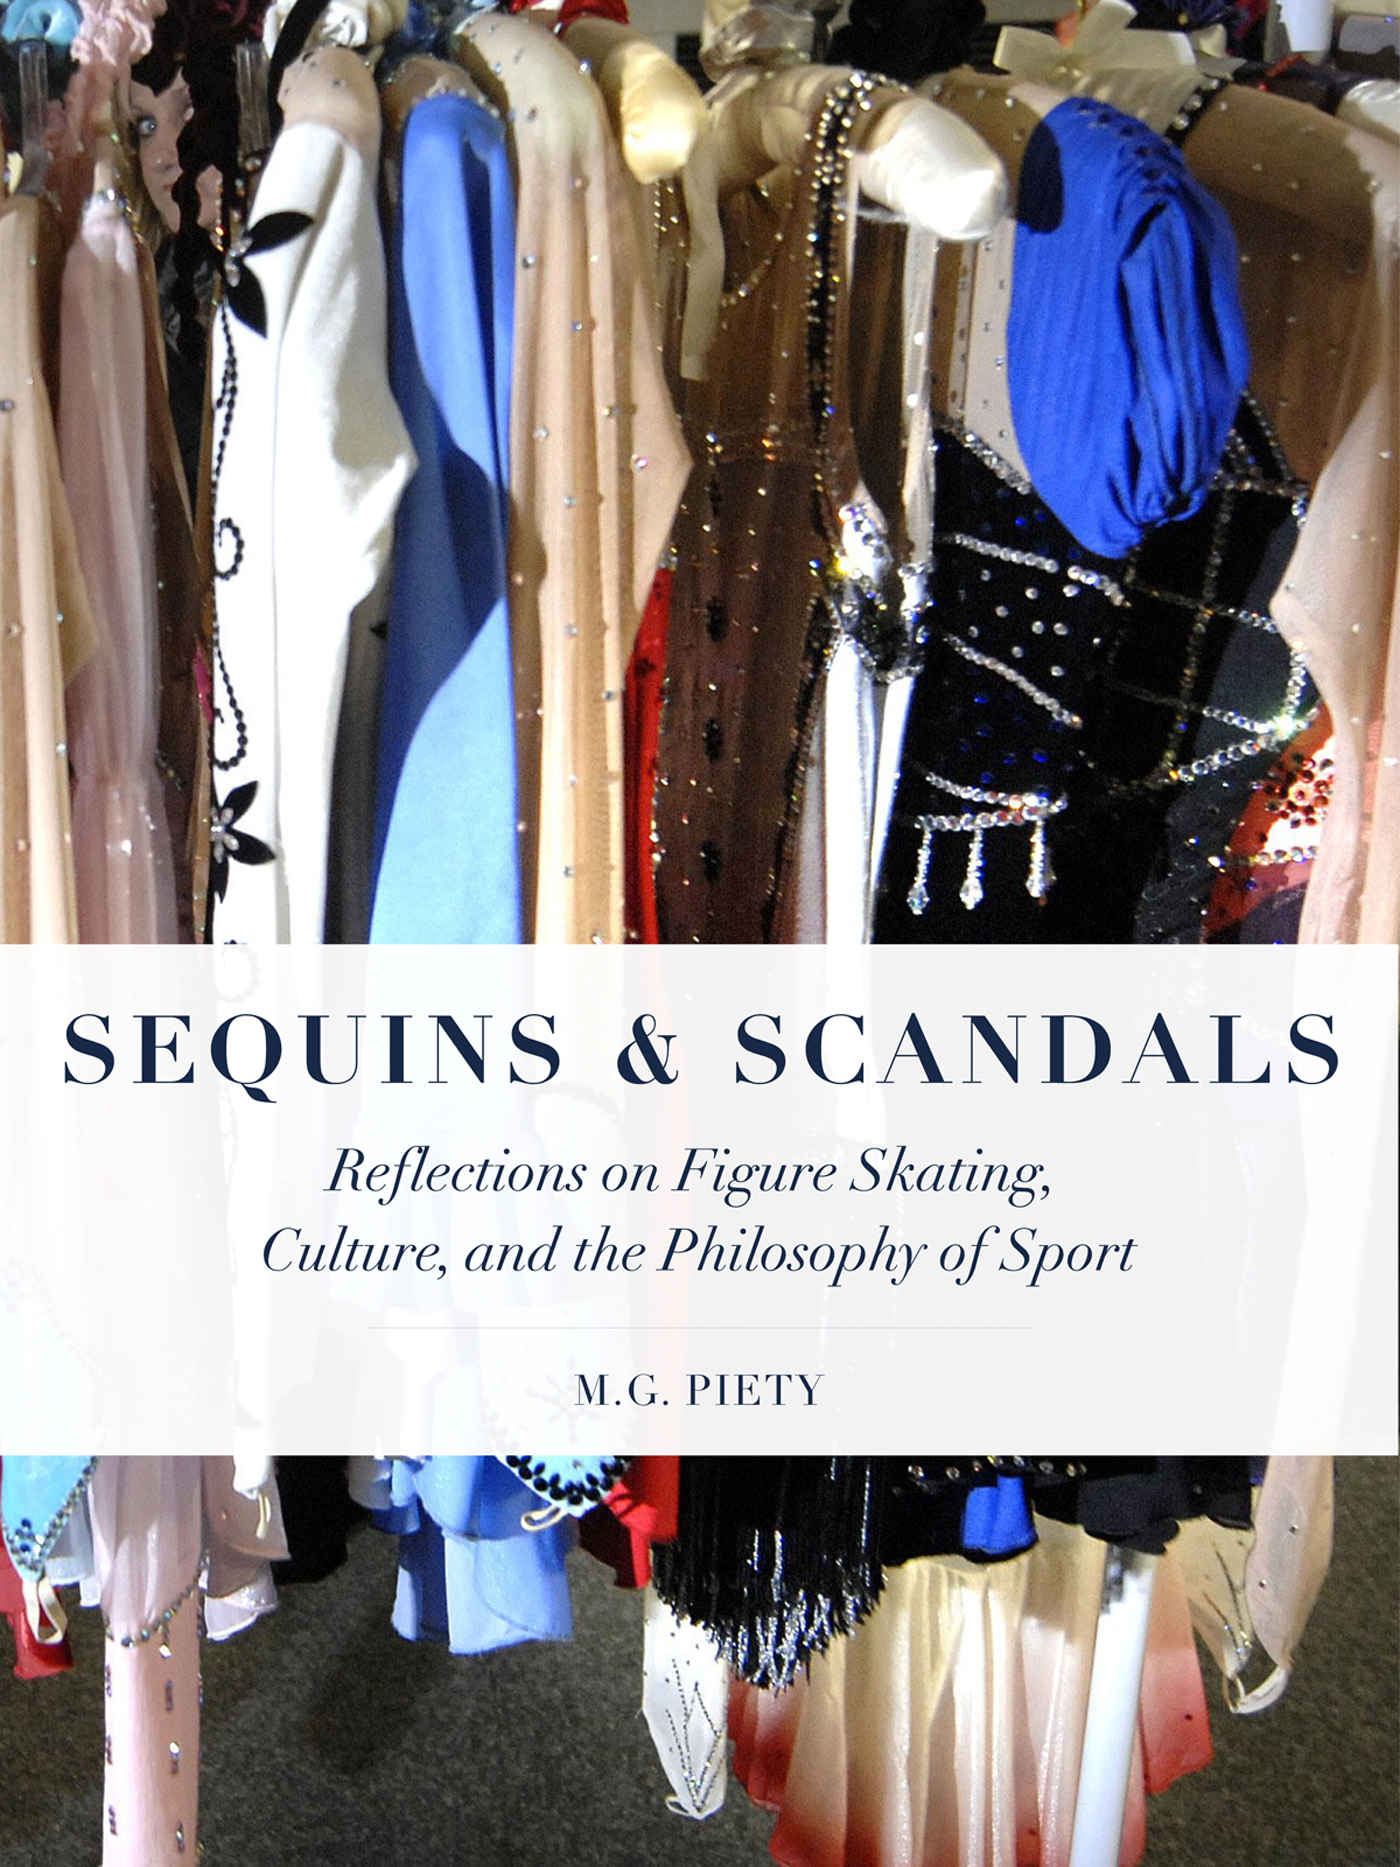 Sequins and Scandals by M.G. Piety